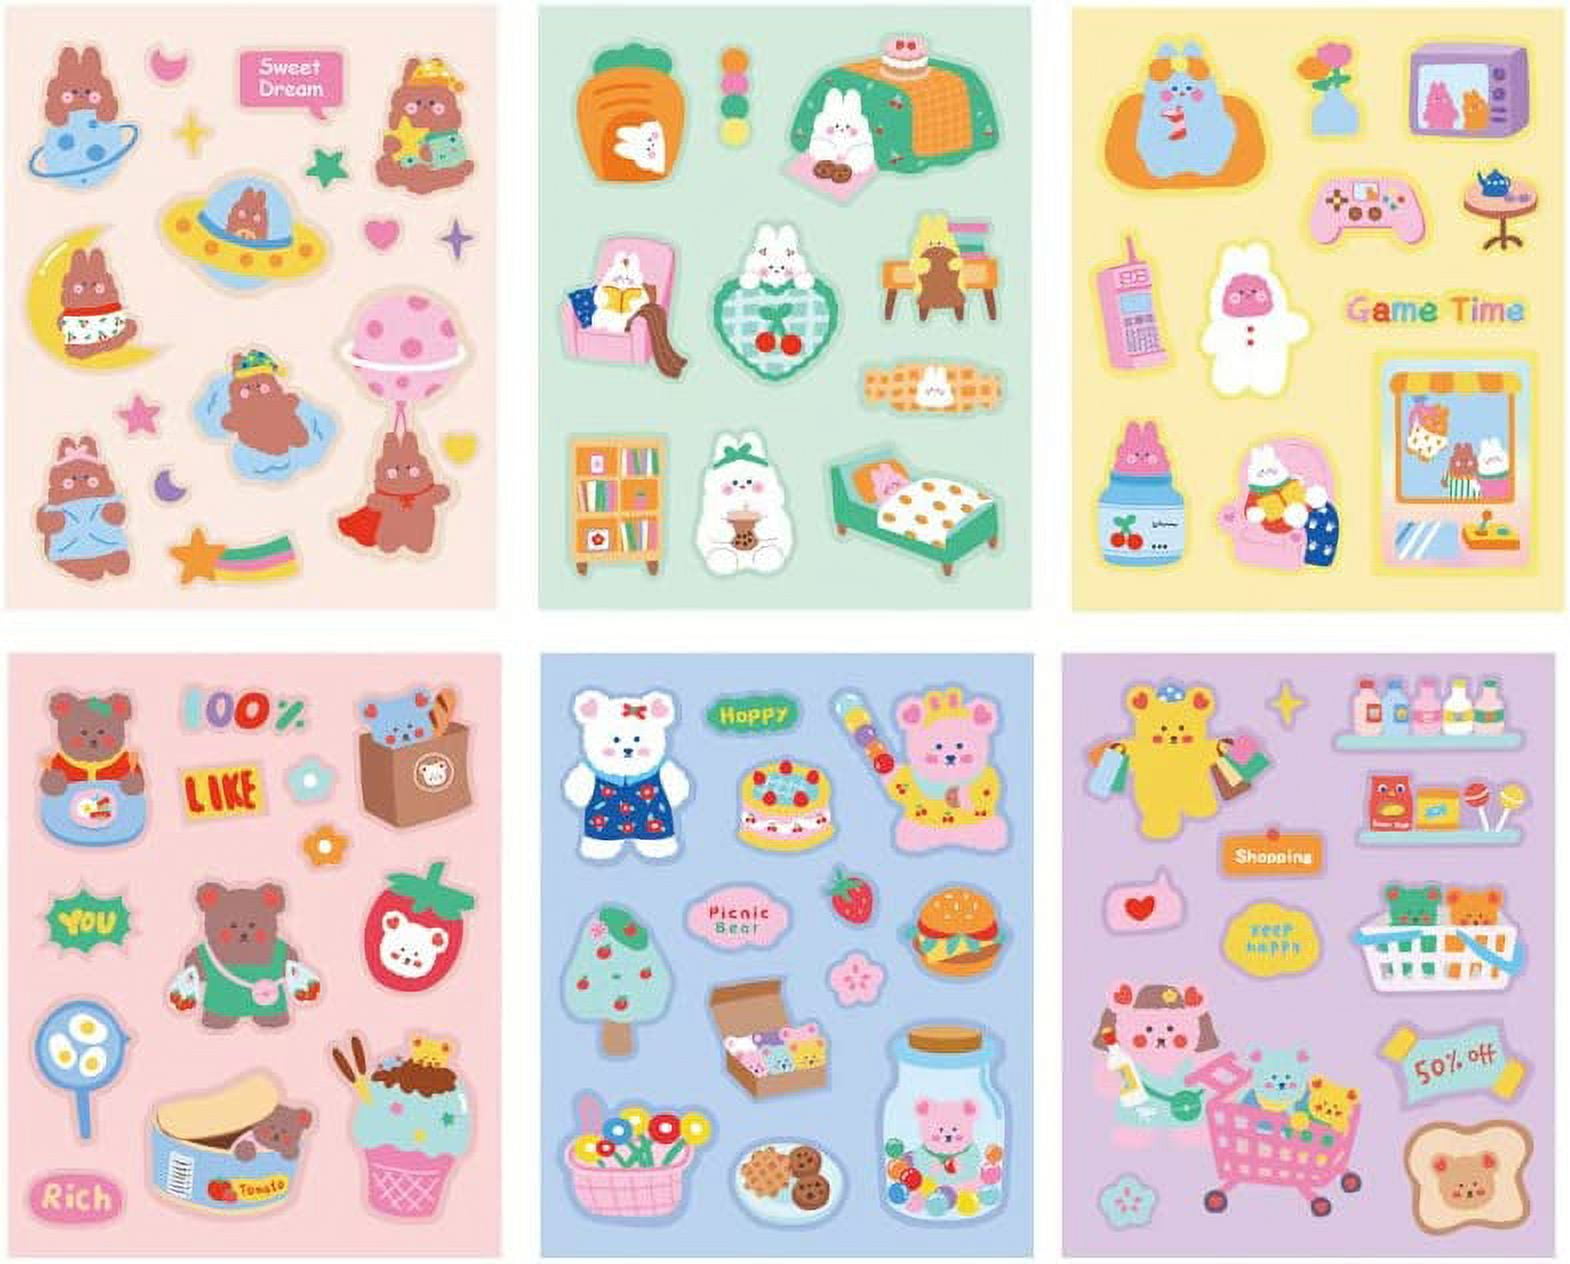 2pcs Self-adhesive Eye Stickers, Colorful Cartoon Mini Labels For DIY Crafts,  Scrapbooking, Notebooks, Party Gifts (2000/pair, Single Or Double Row,  Random Delivery)